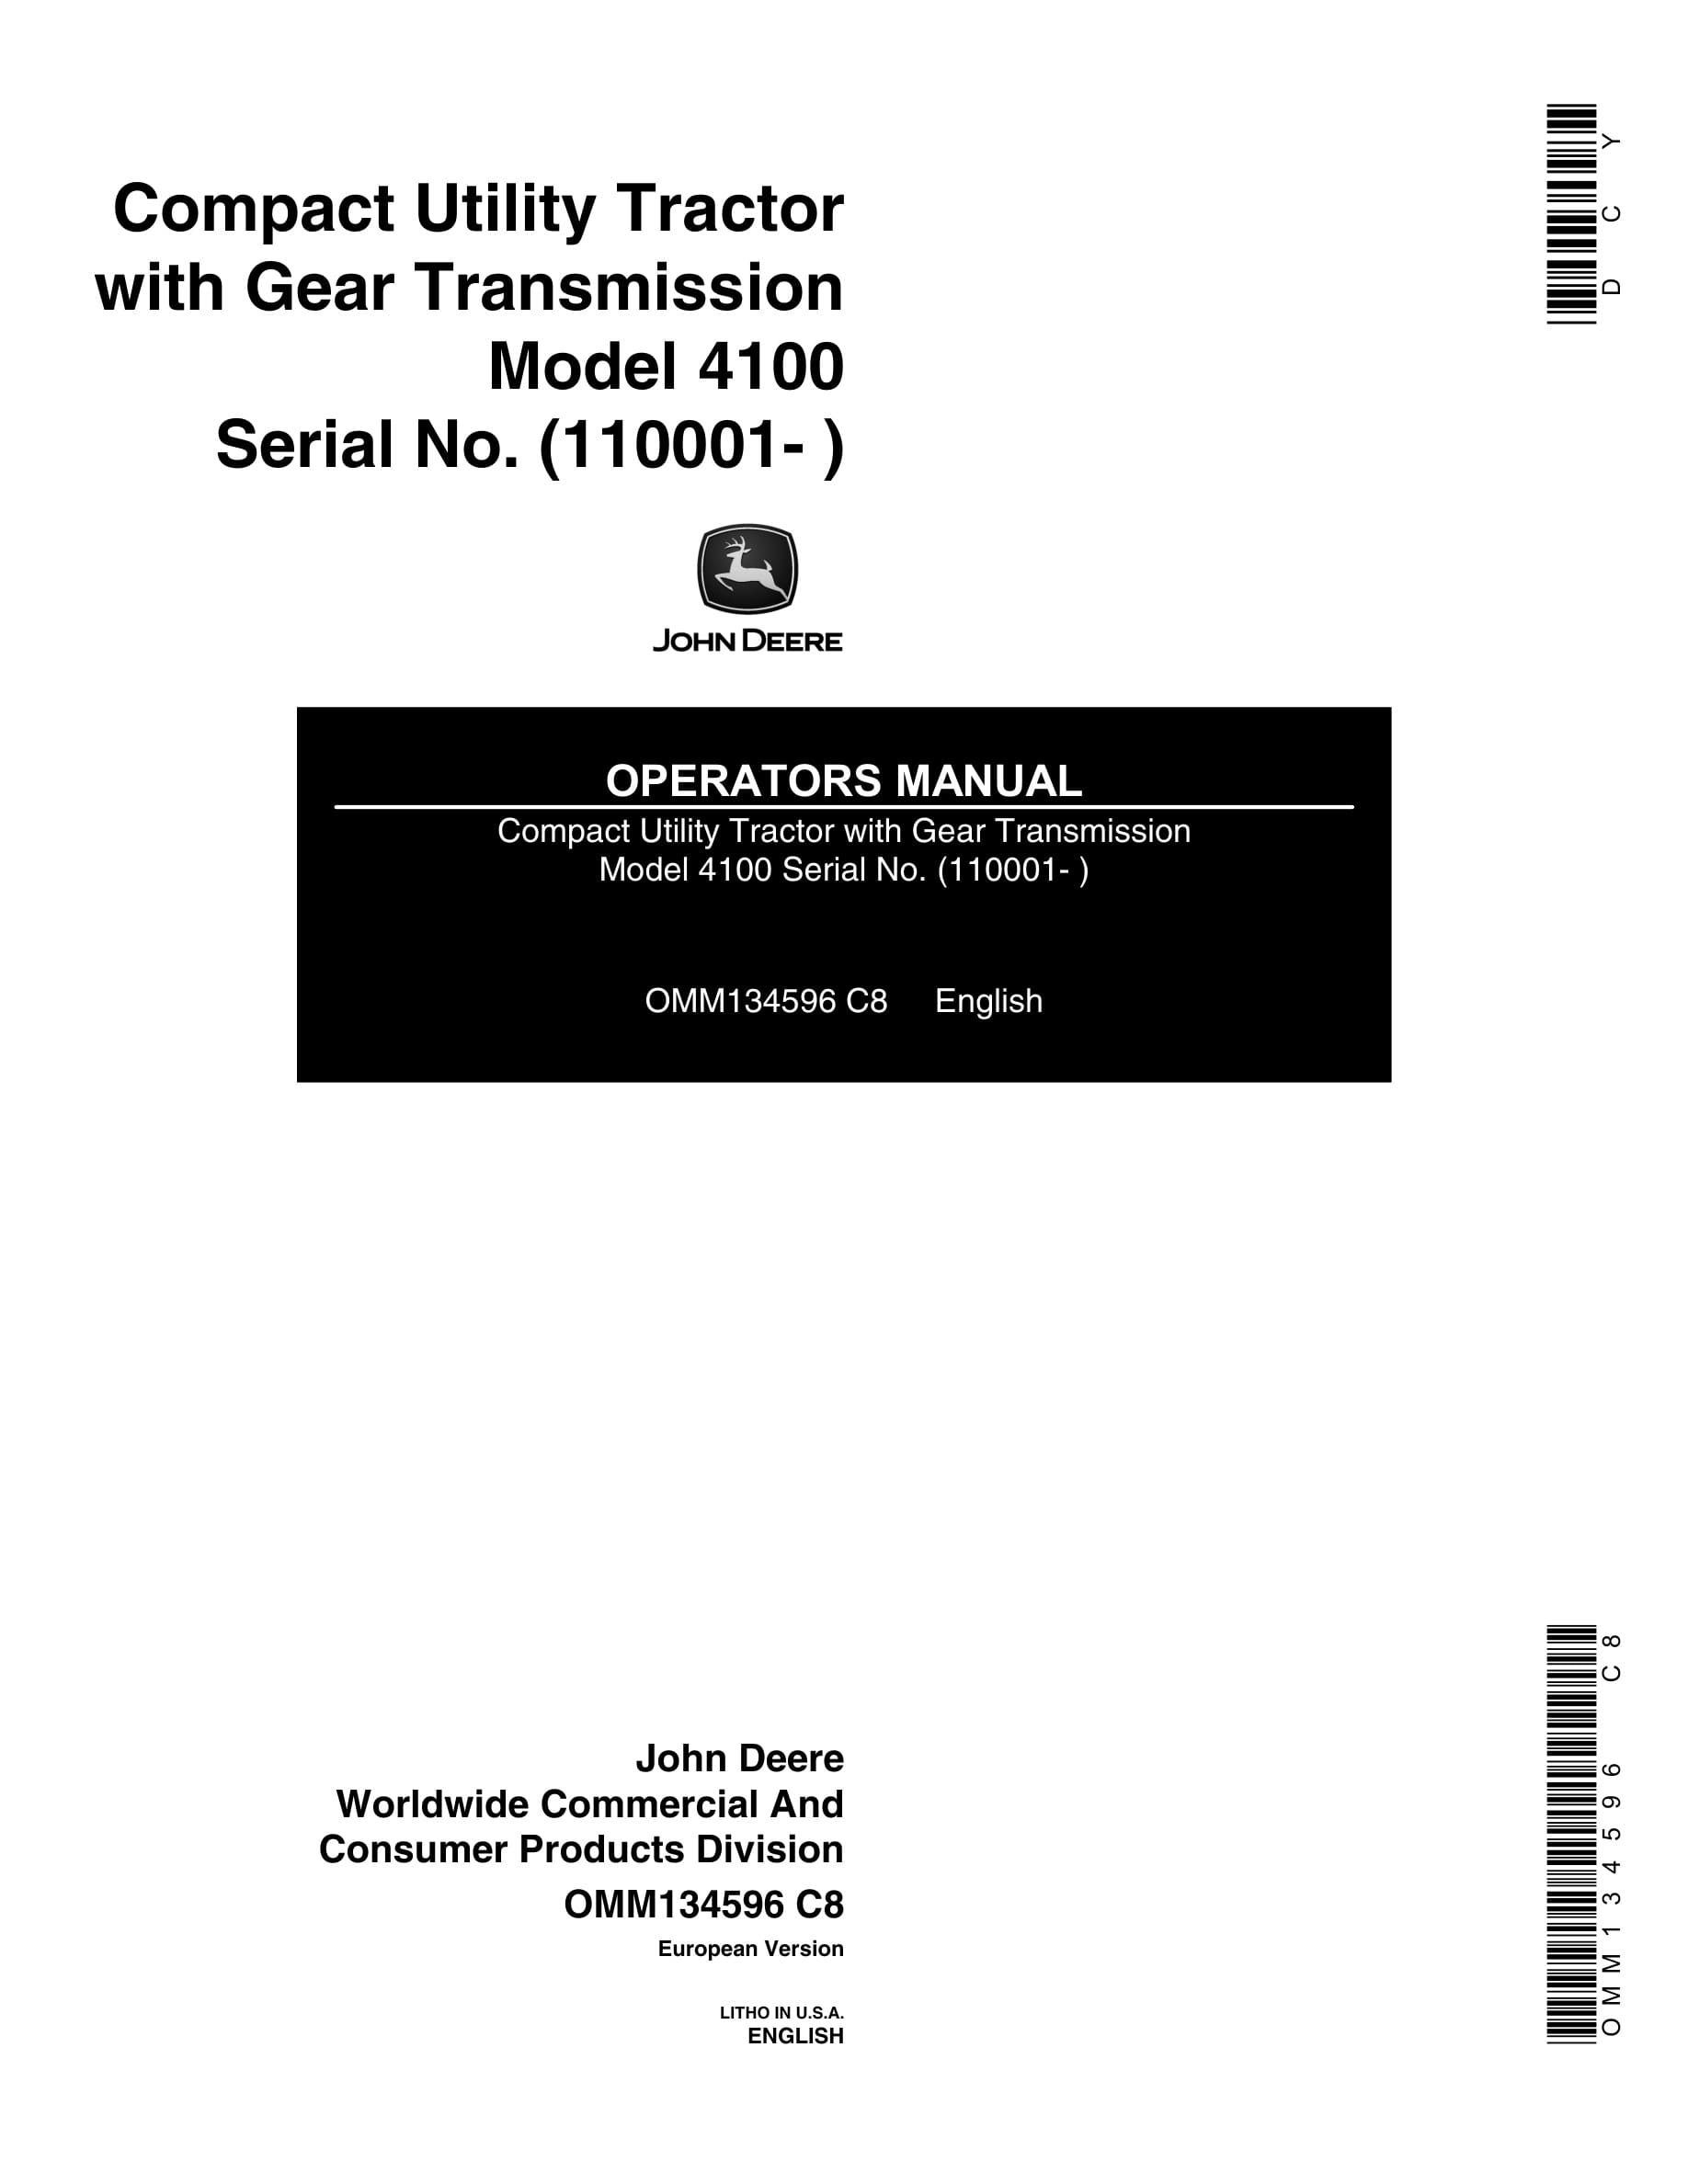 John Deere Compact Utility Tractors Operator Manual With Gear Transmission 4100 OMM134596-1